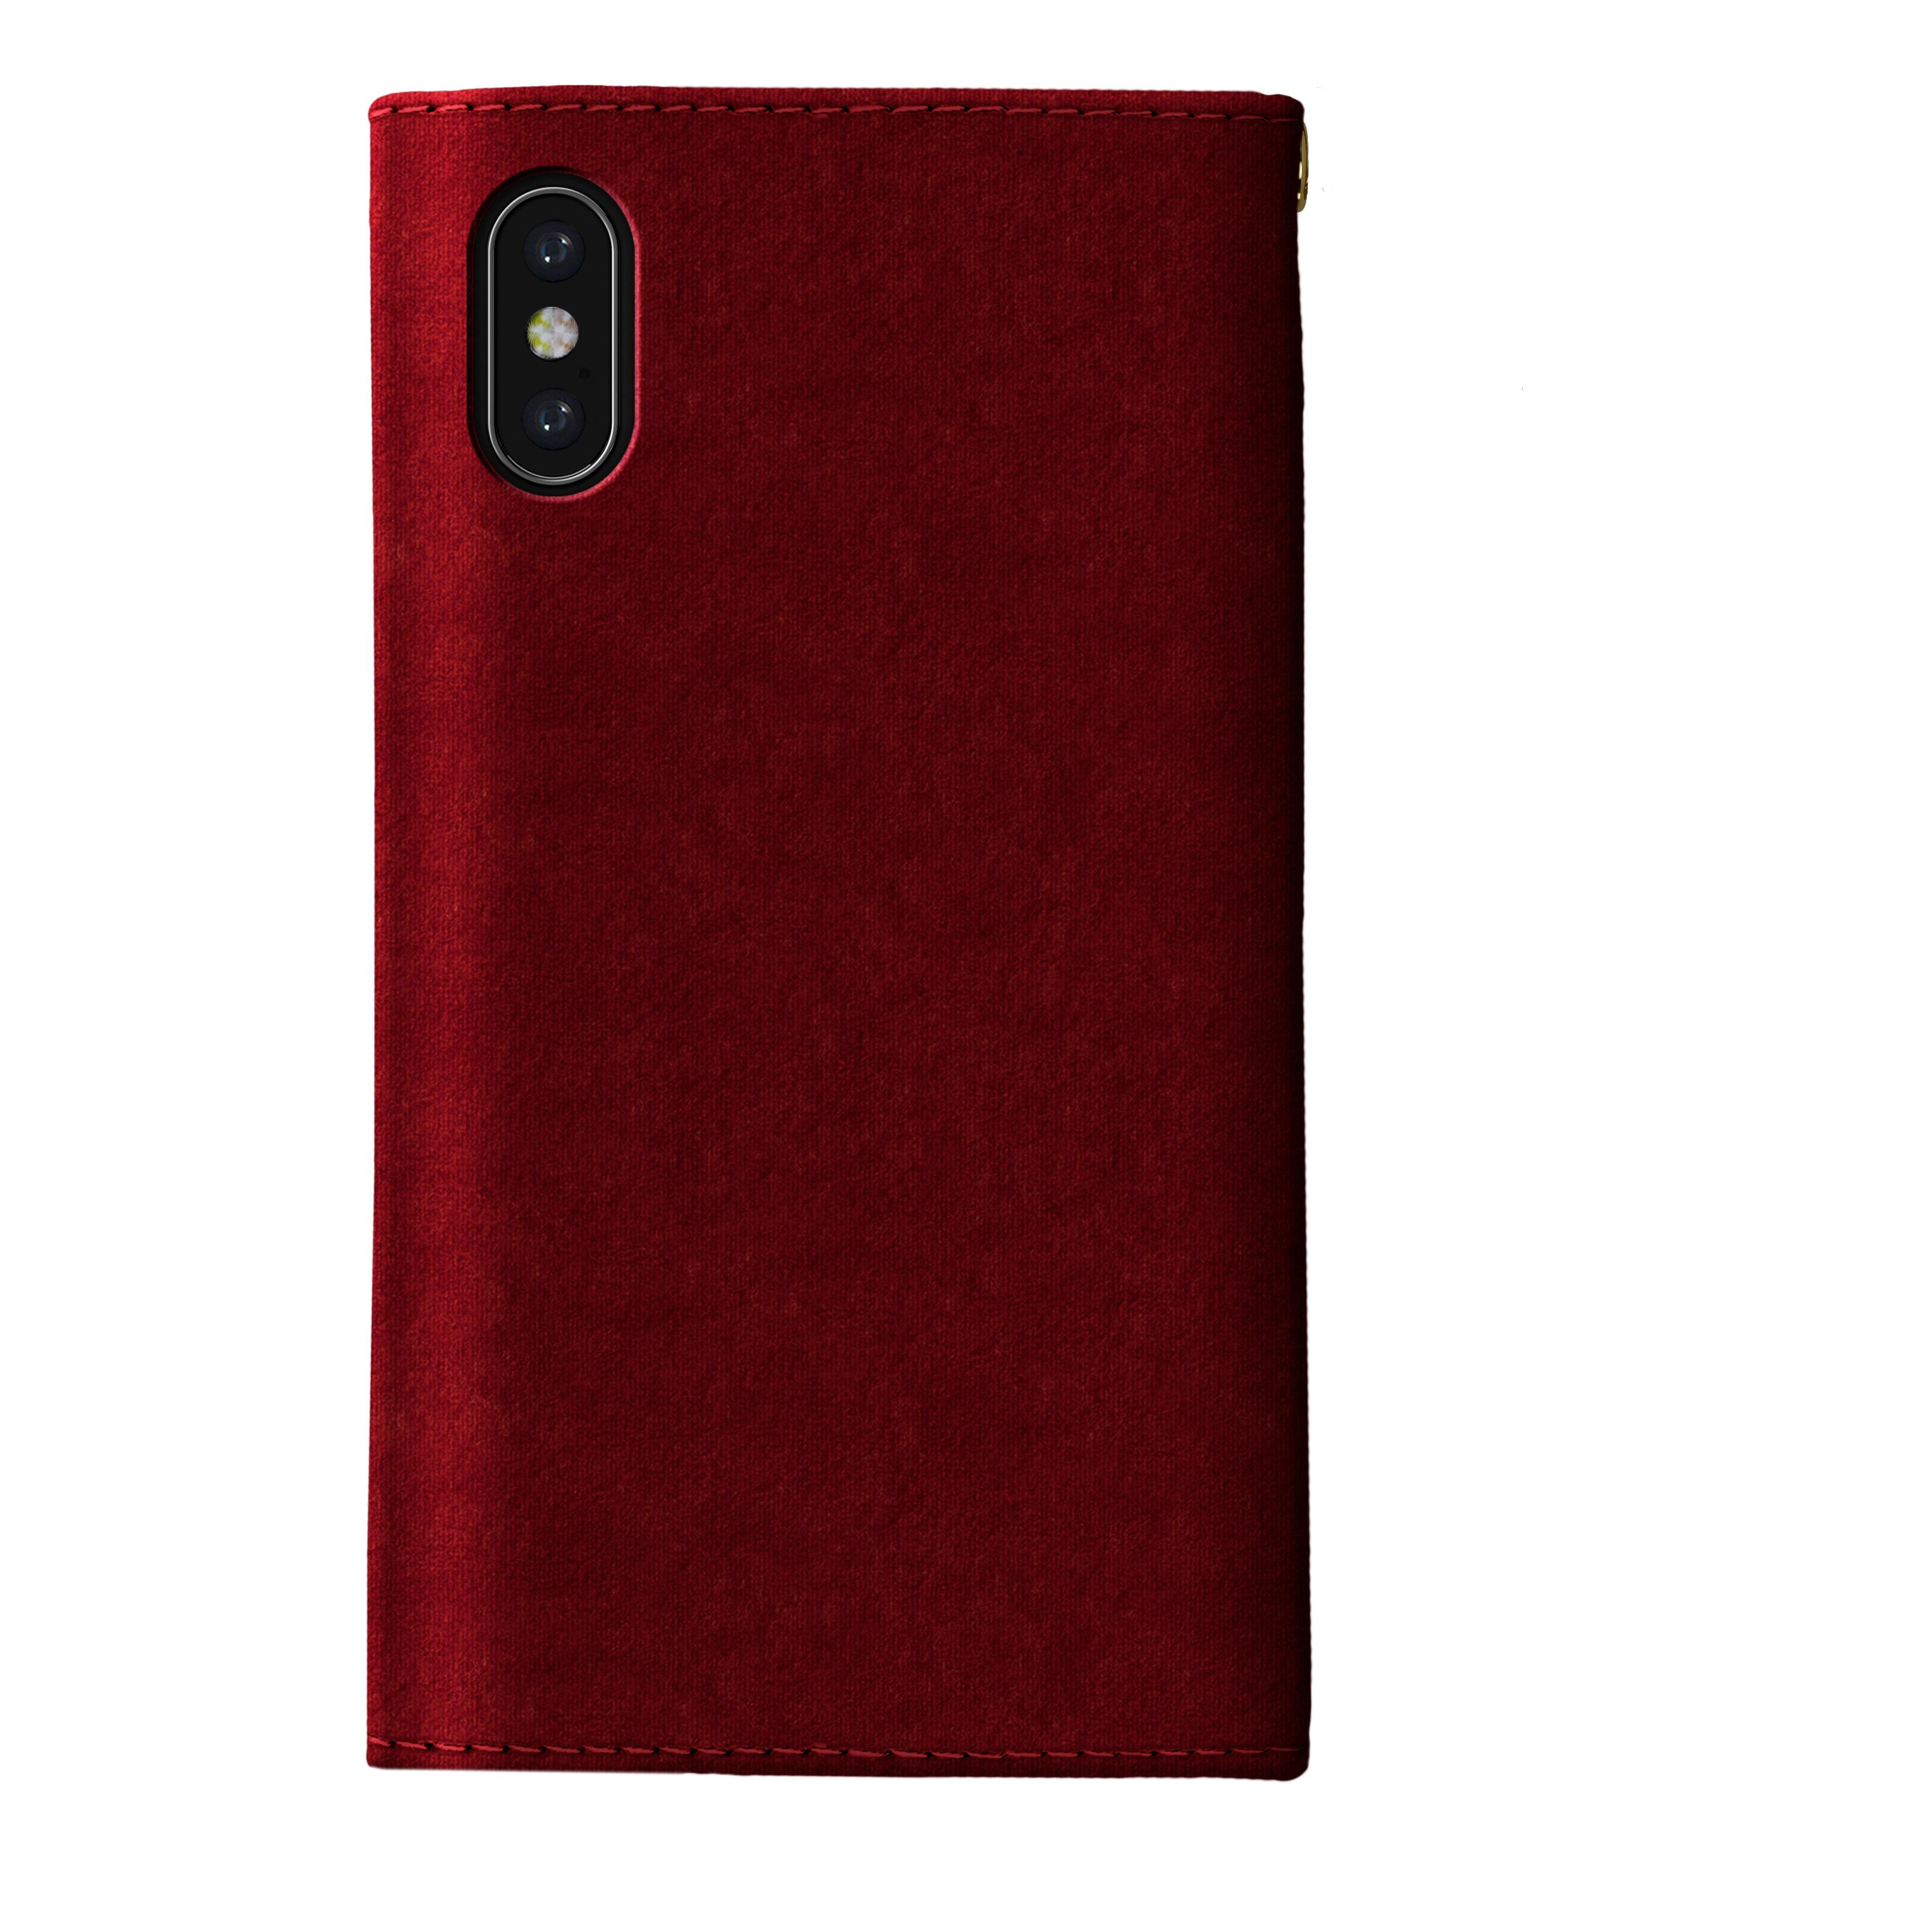 iPhone Xs Max Mayfair Clutch Velvet Red